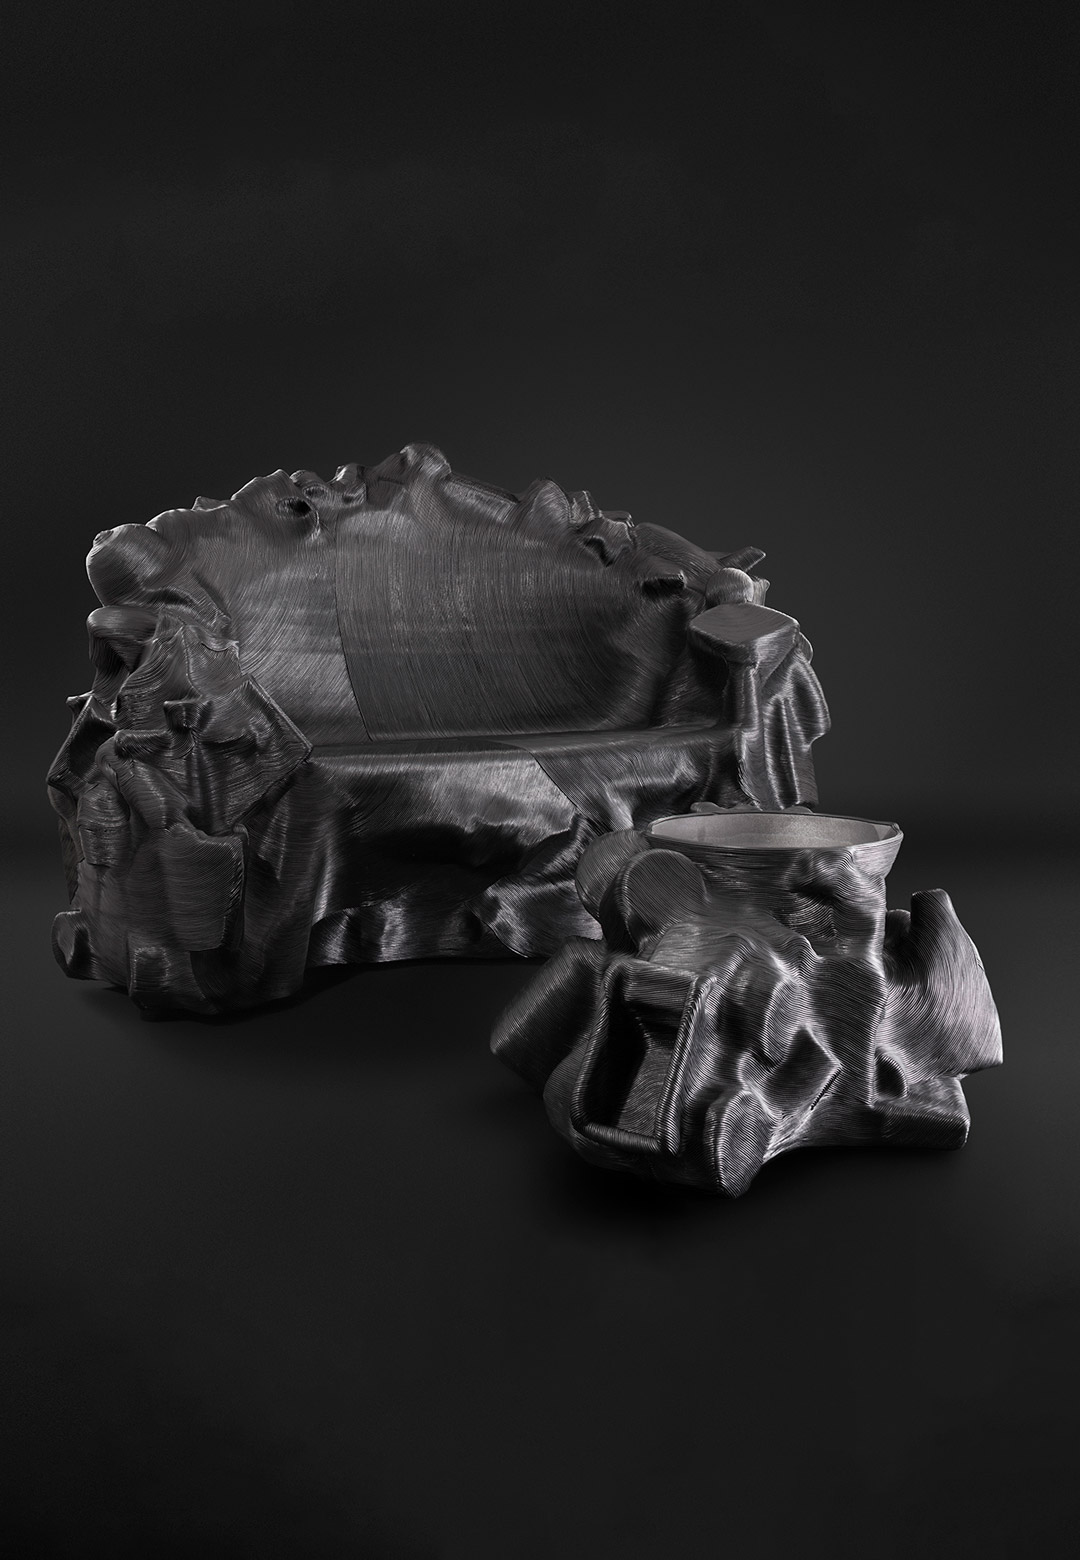 Jay Sae Jung Oh crafts ‘Salvage’ sculptures of debris draped in leather